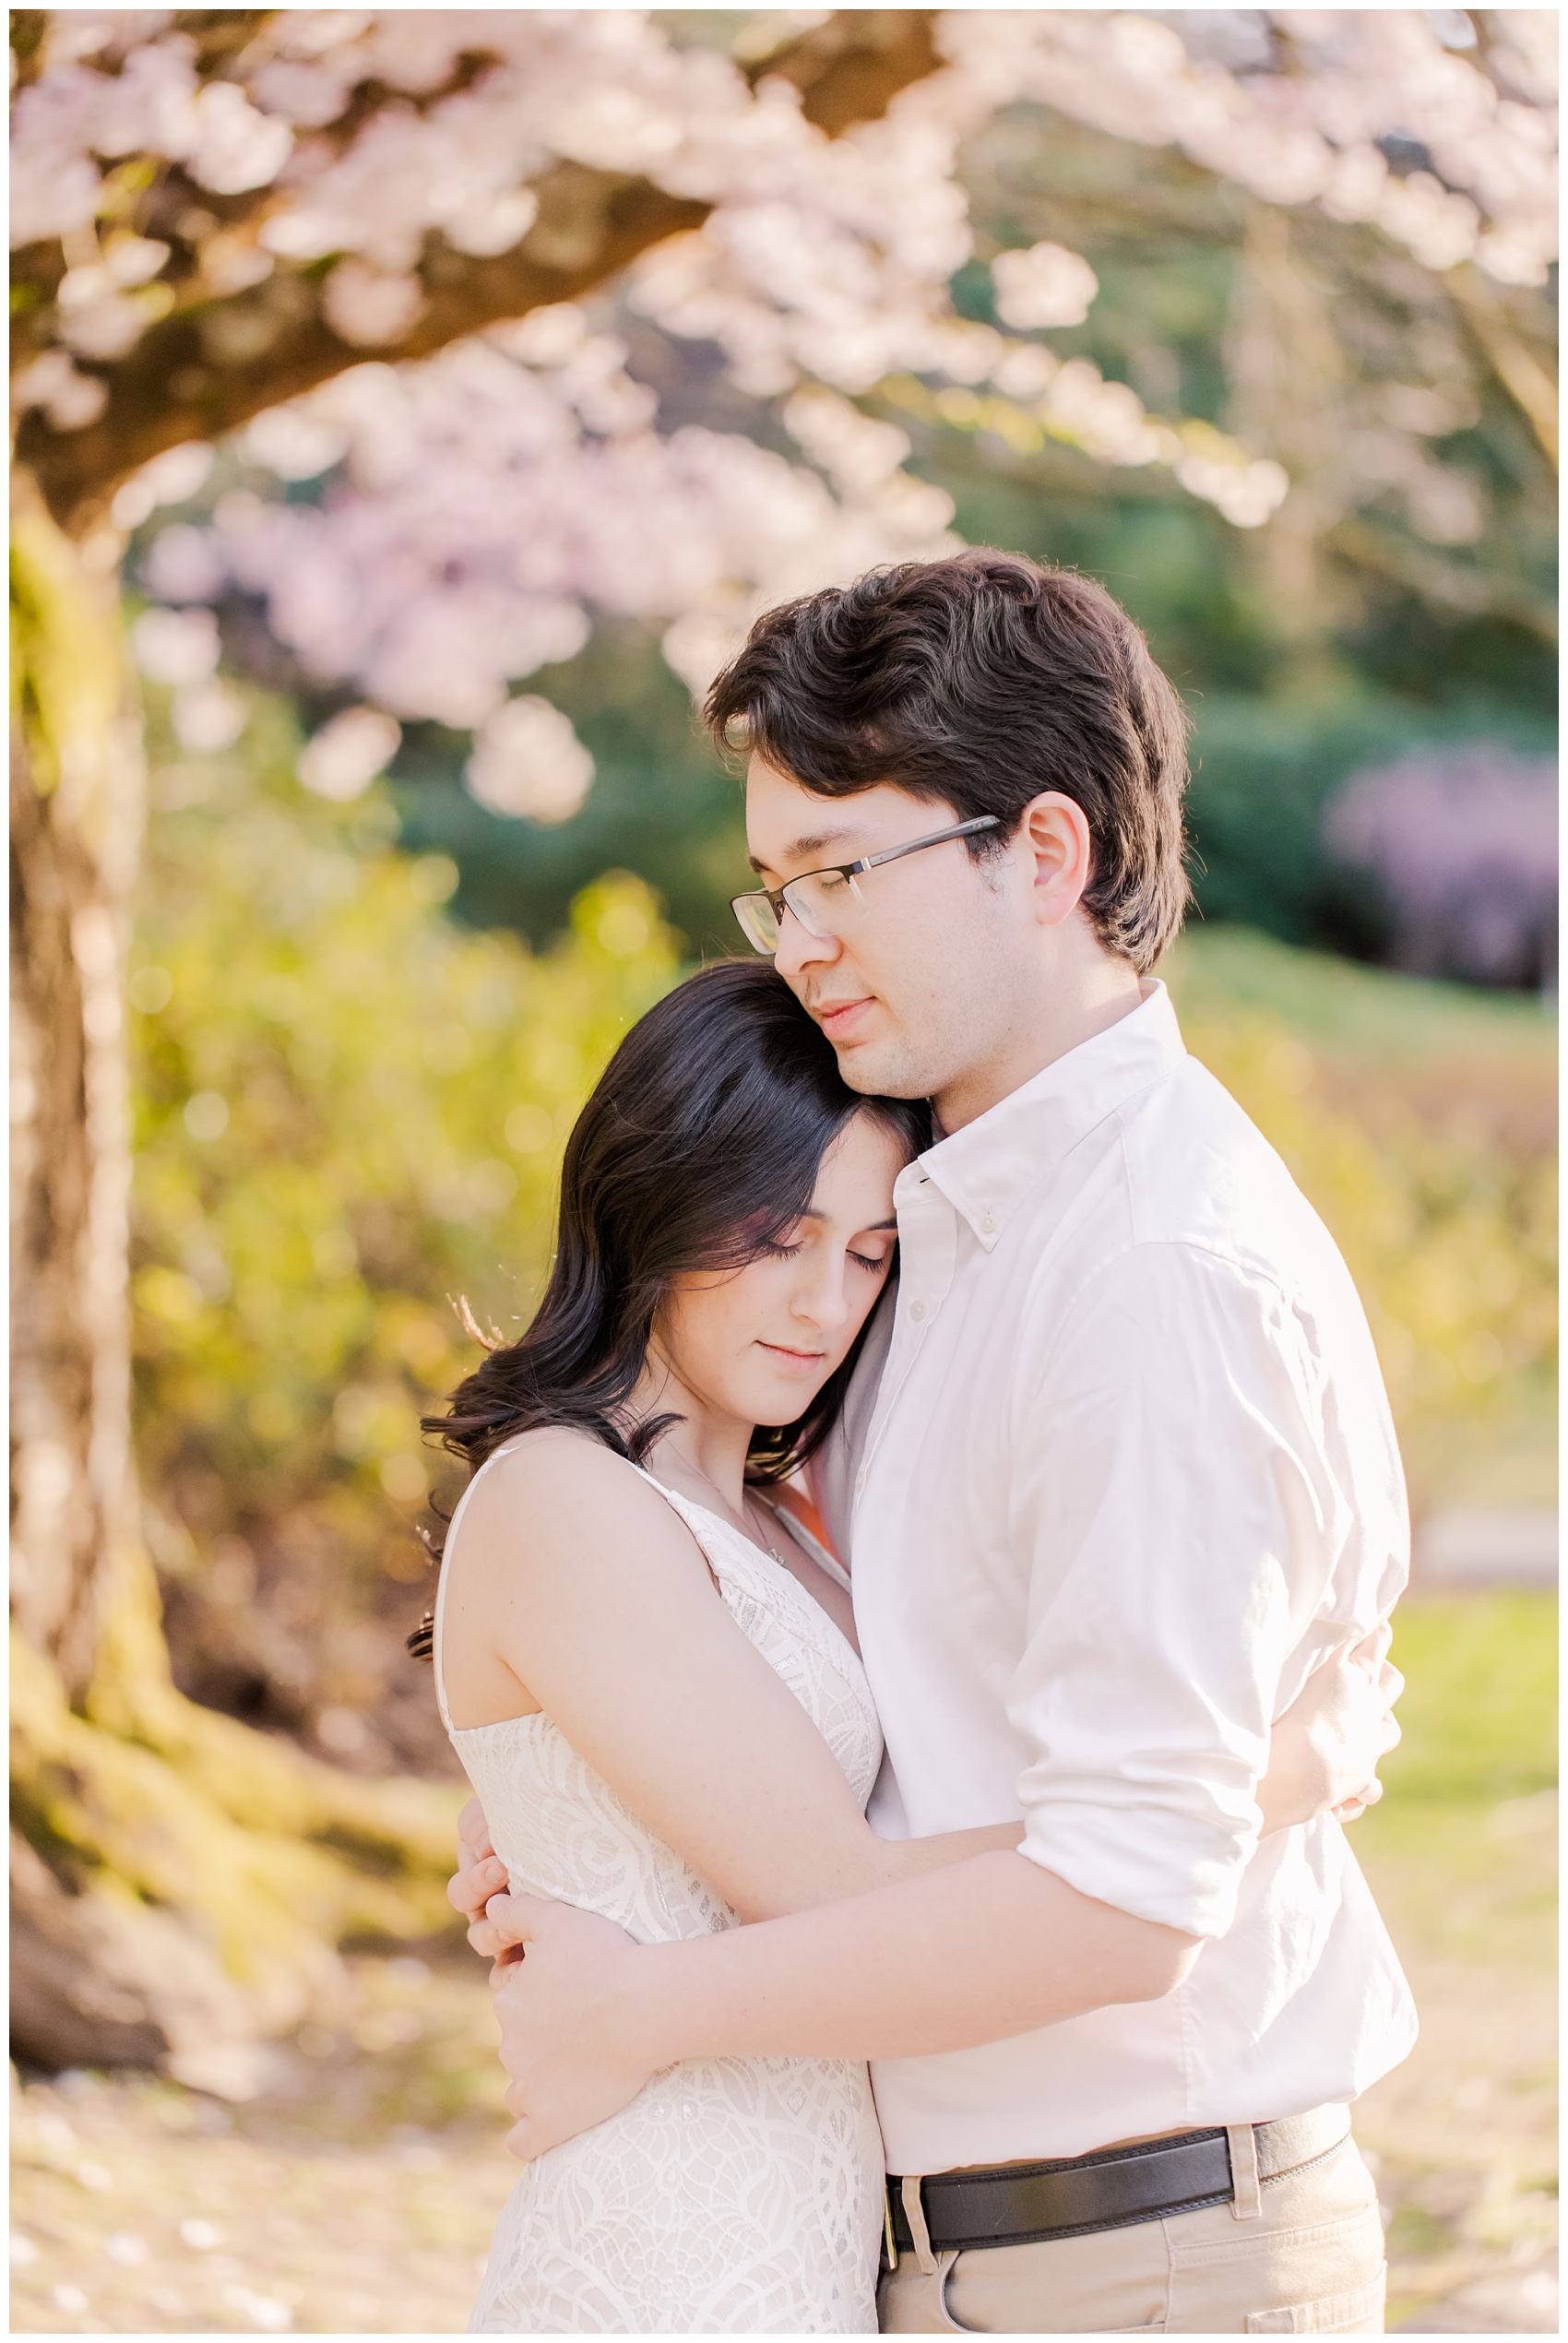 Richmond BC Engagement Photos with Cherry Blossoms at Minoru Park